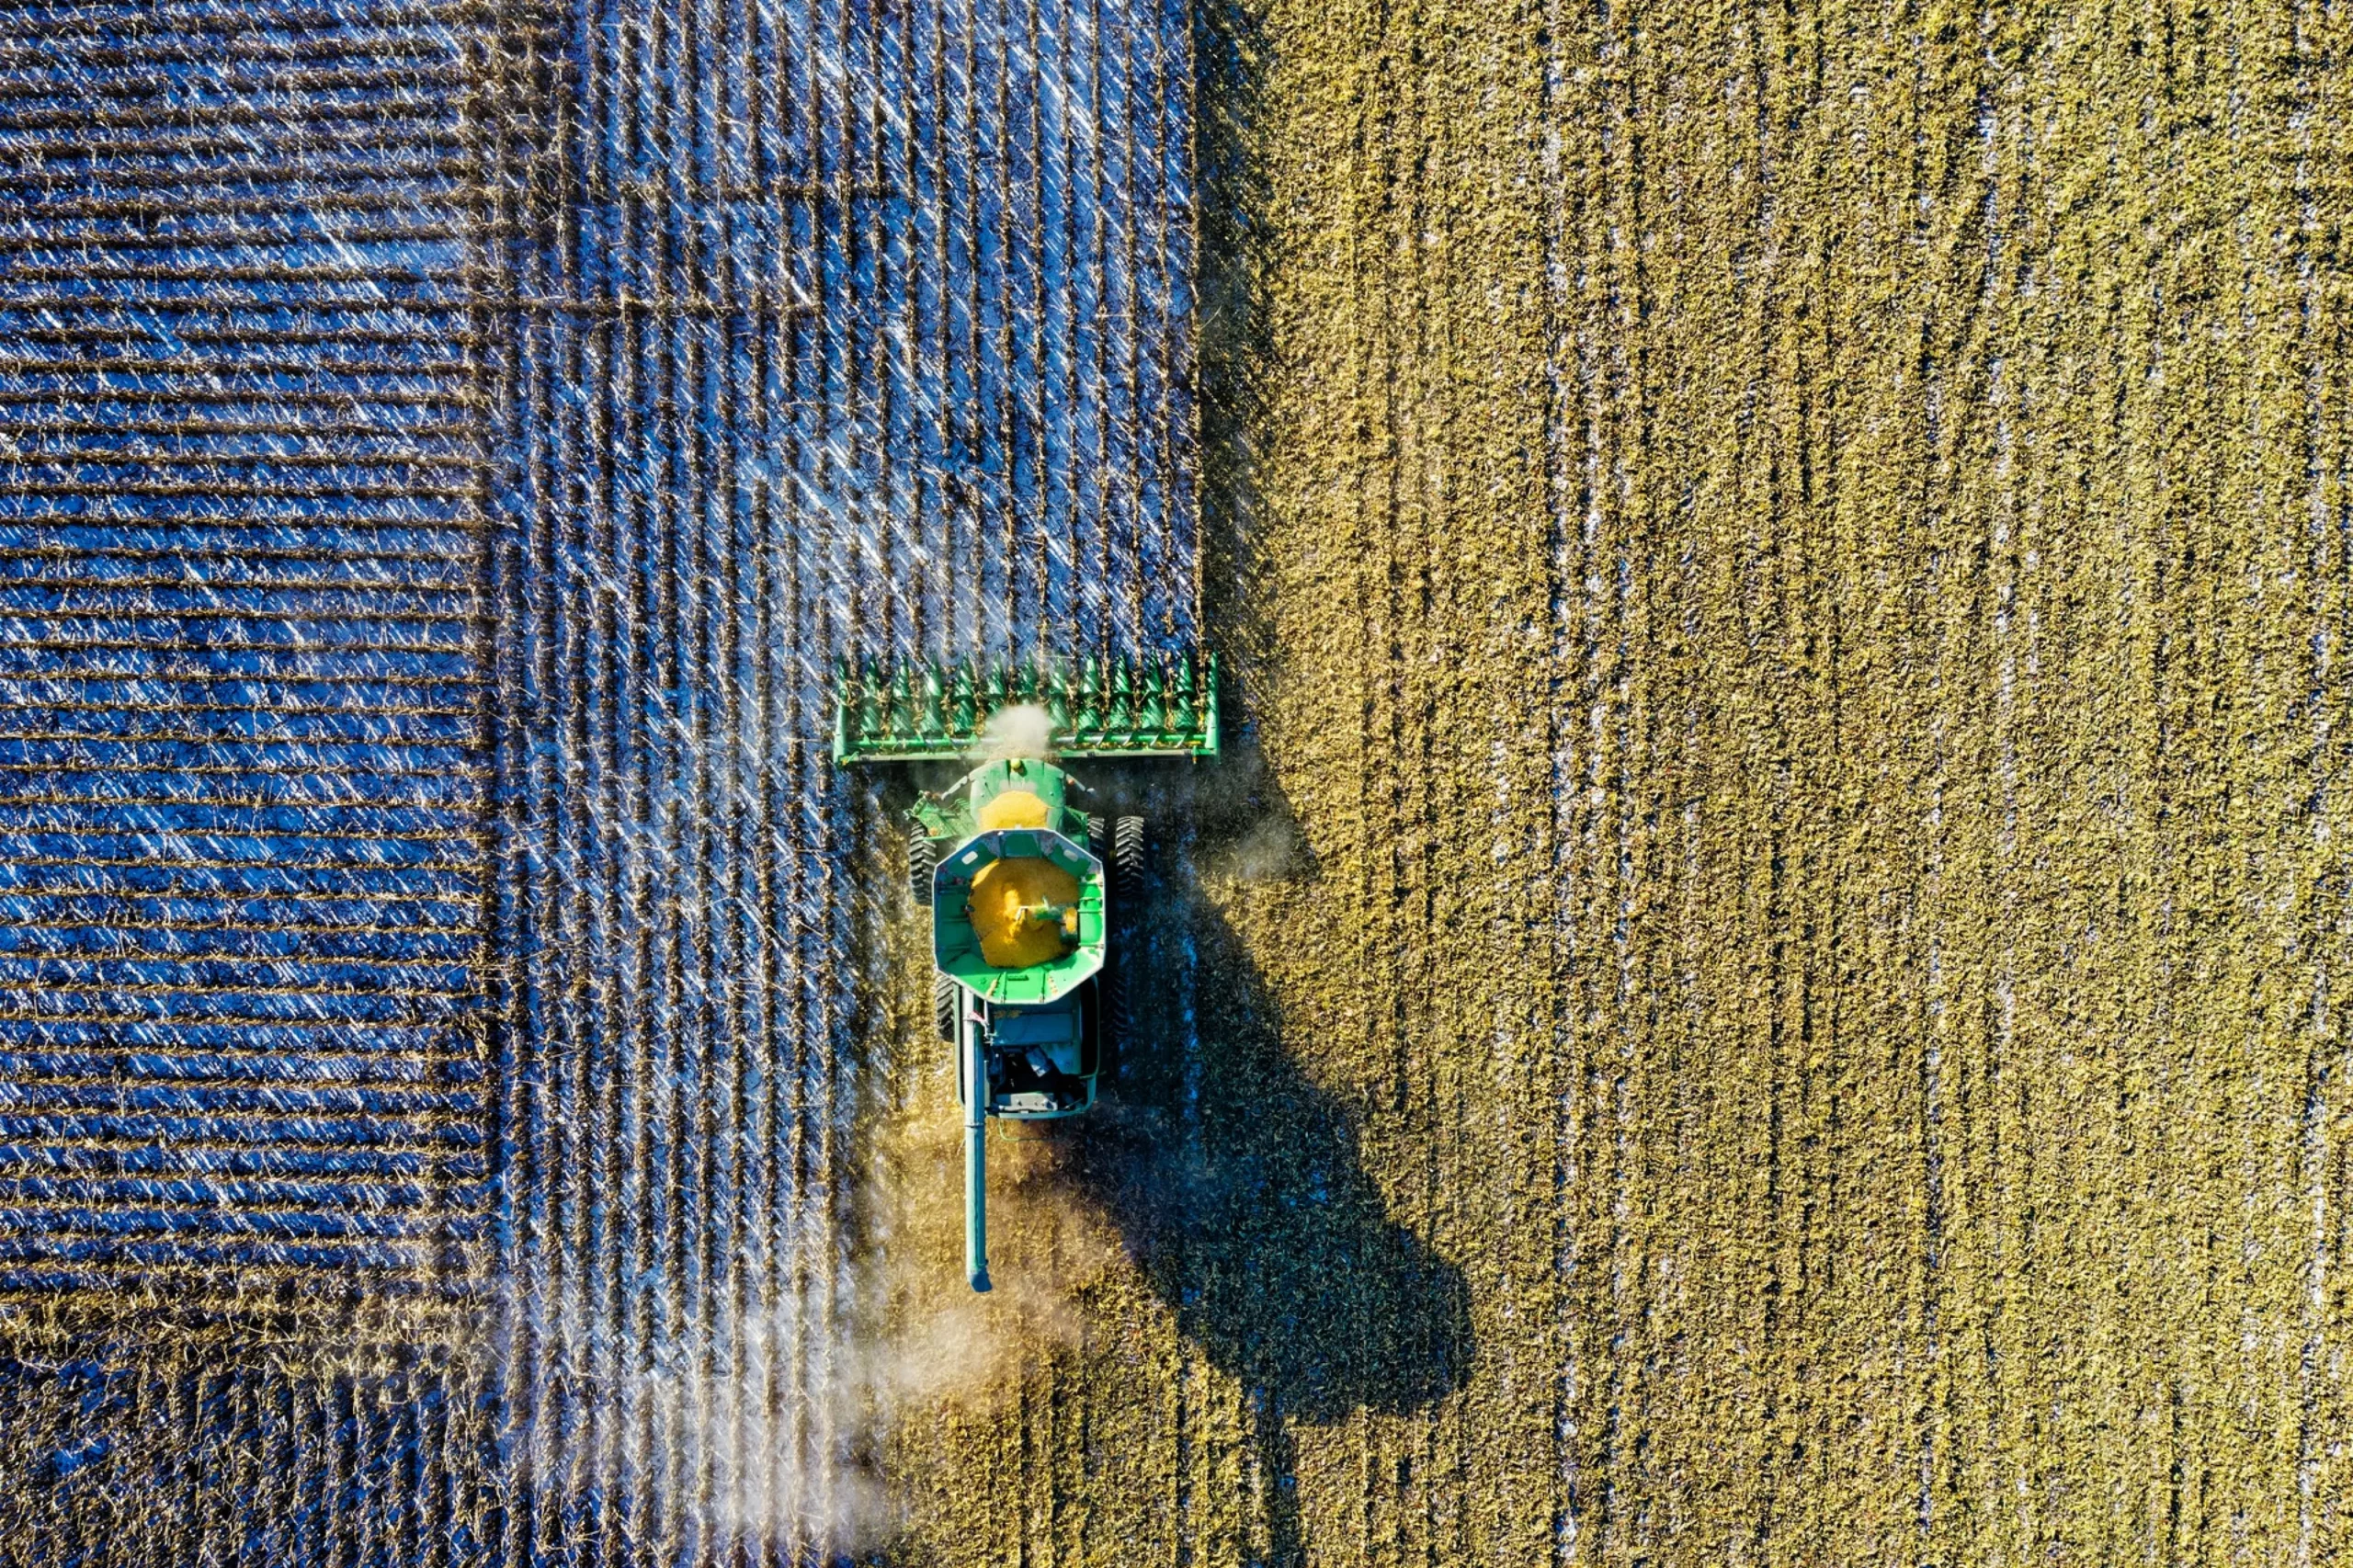 image of a tractor from above harvesting a field